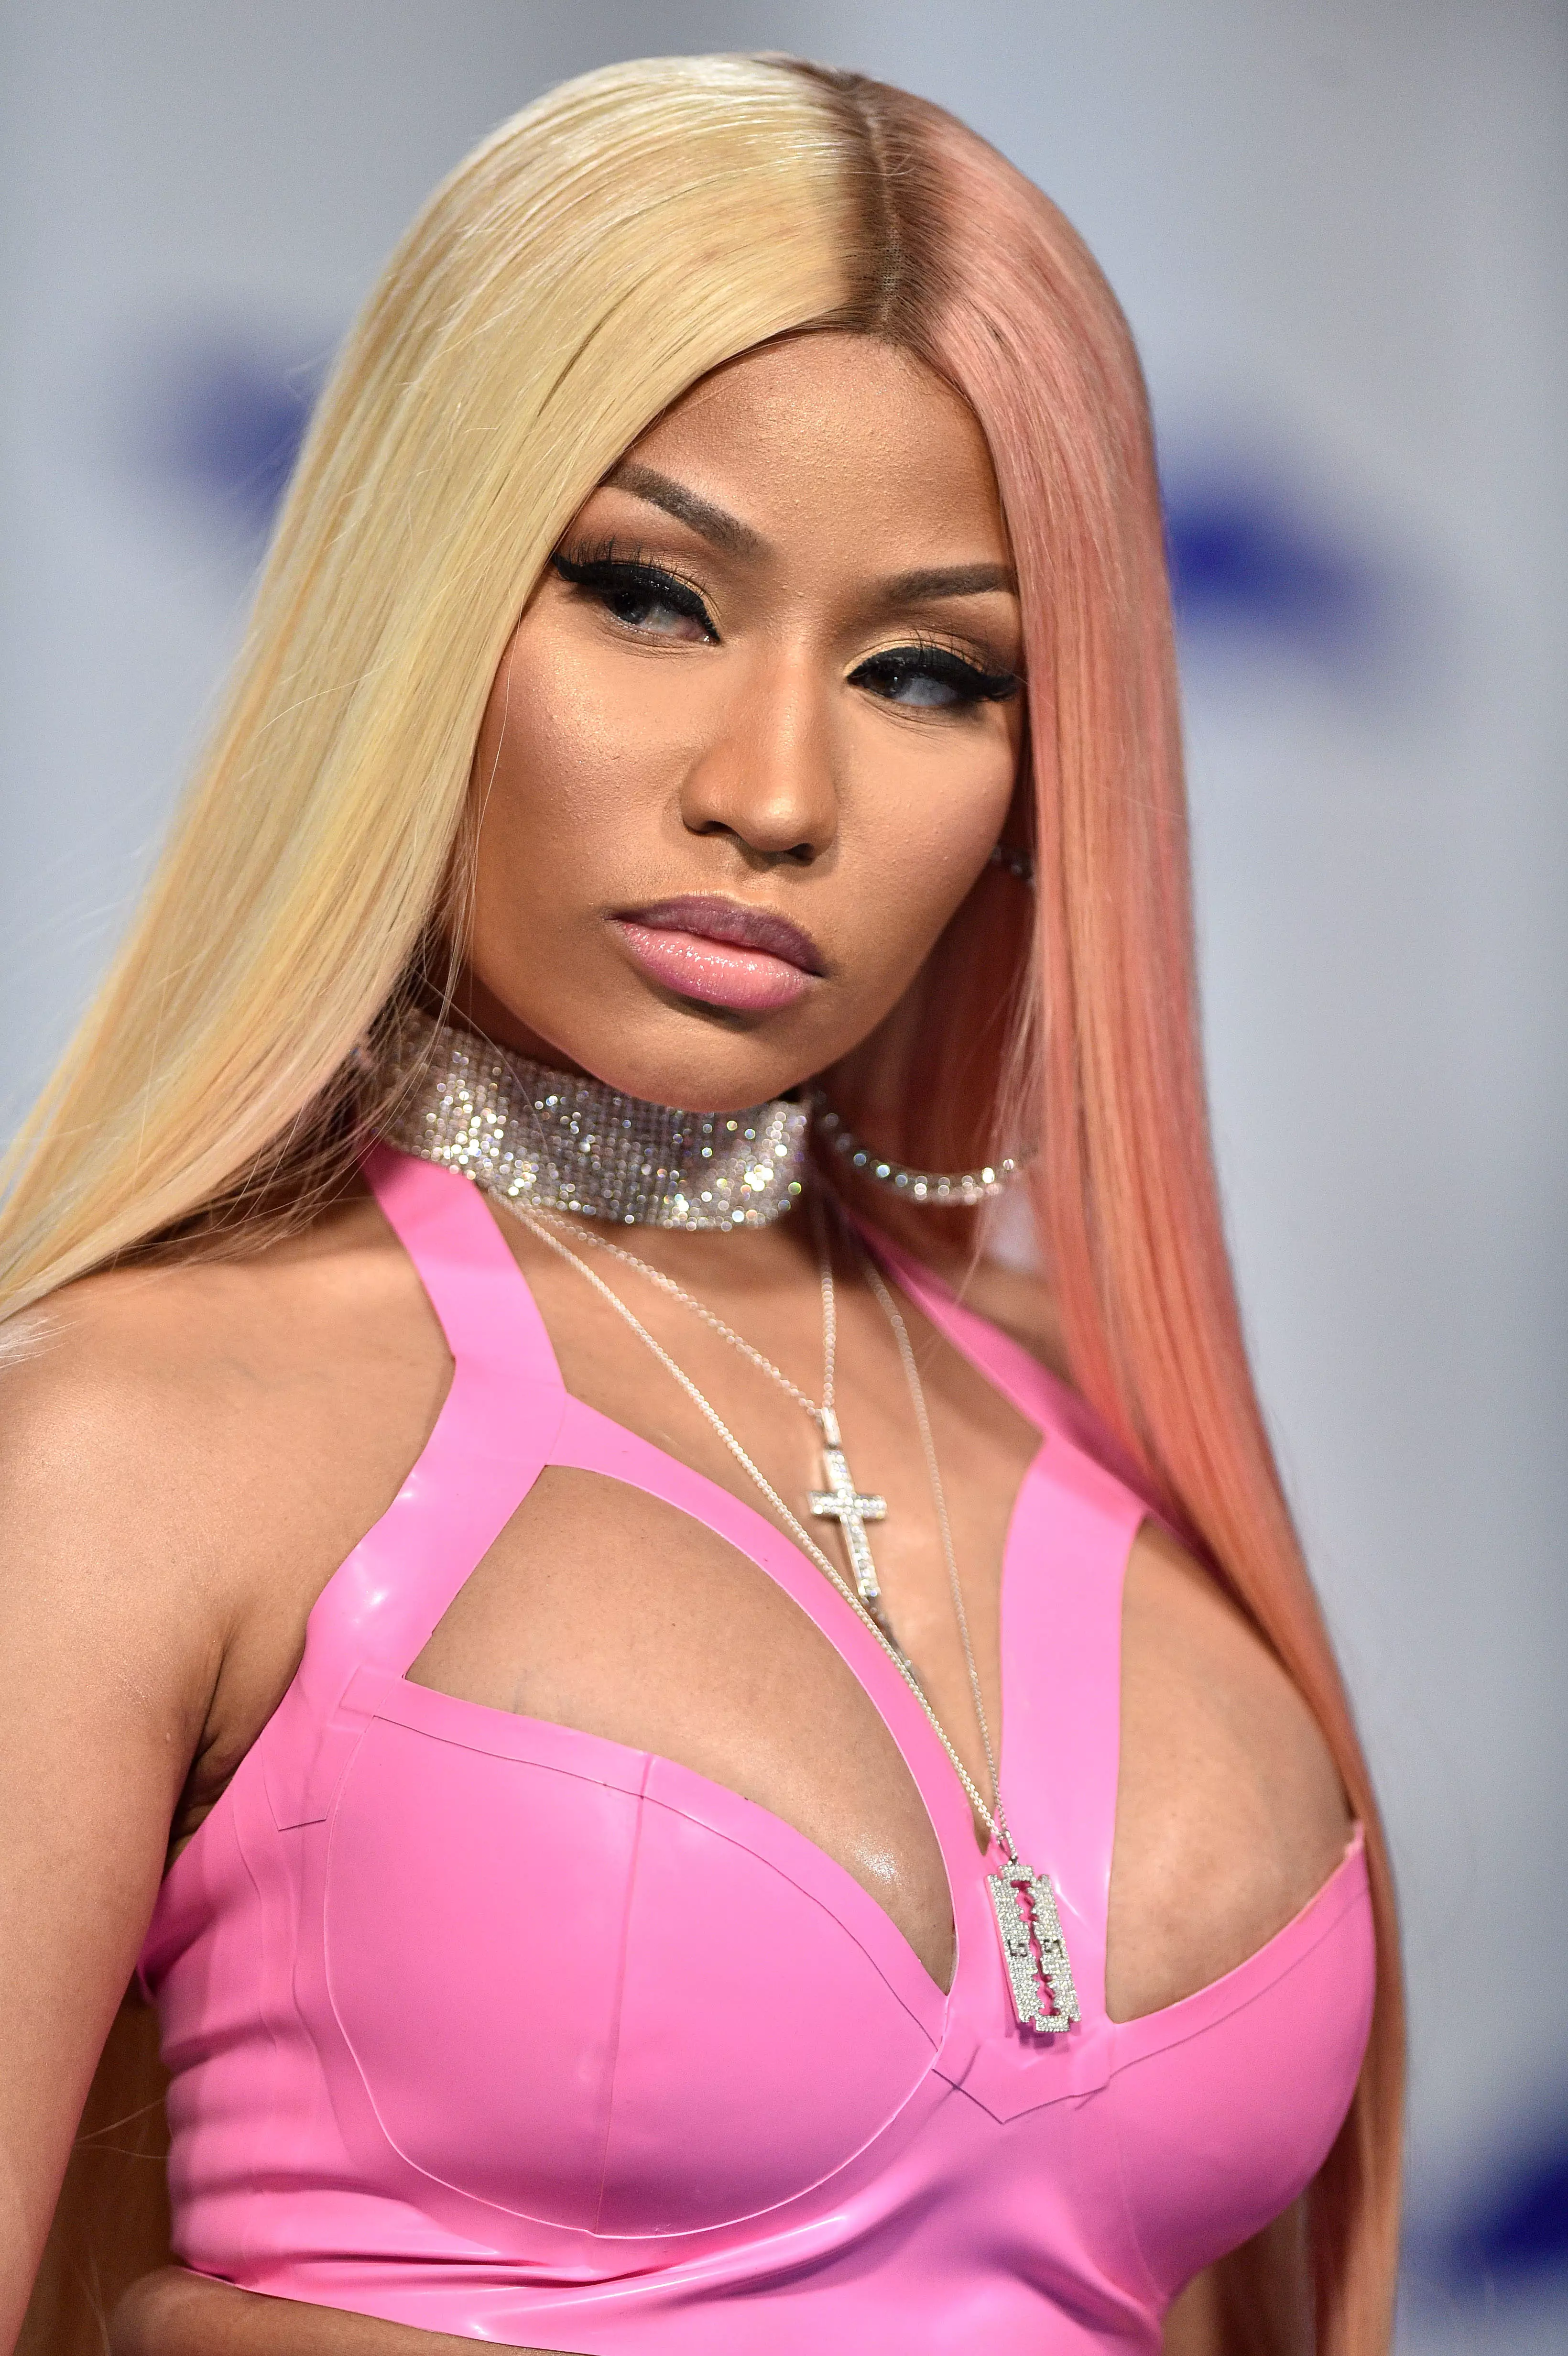 Sia was sent a picture of Nicki Minaj (picture), but she though it was Cardi B.